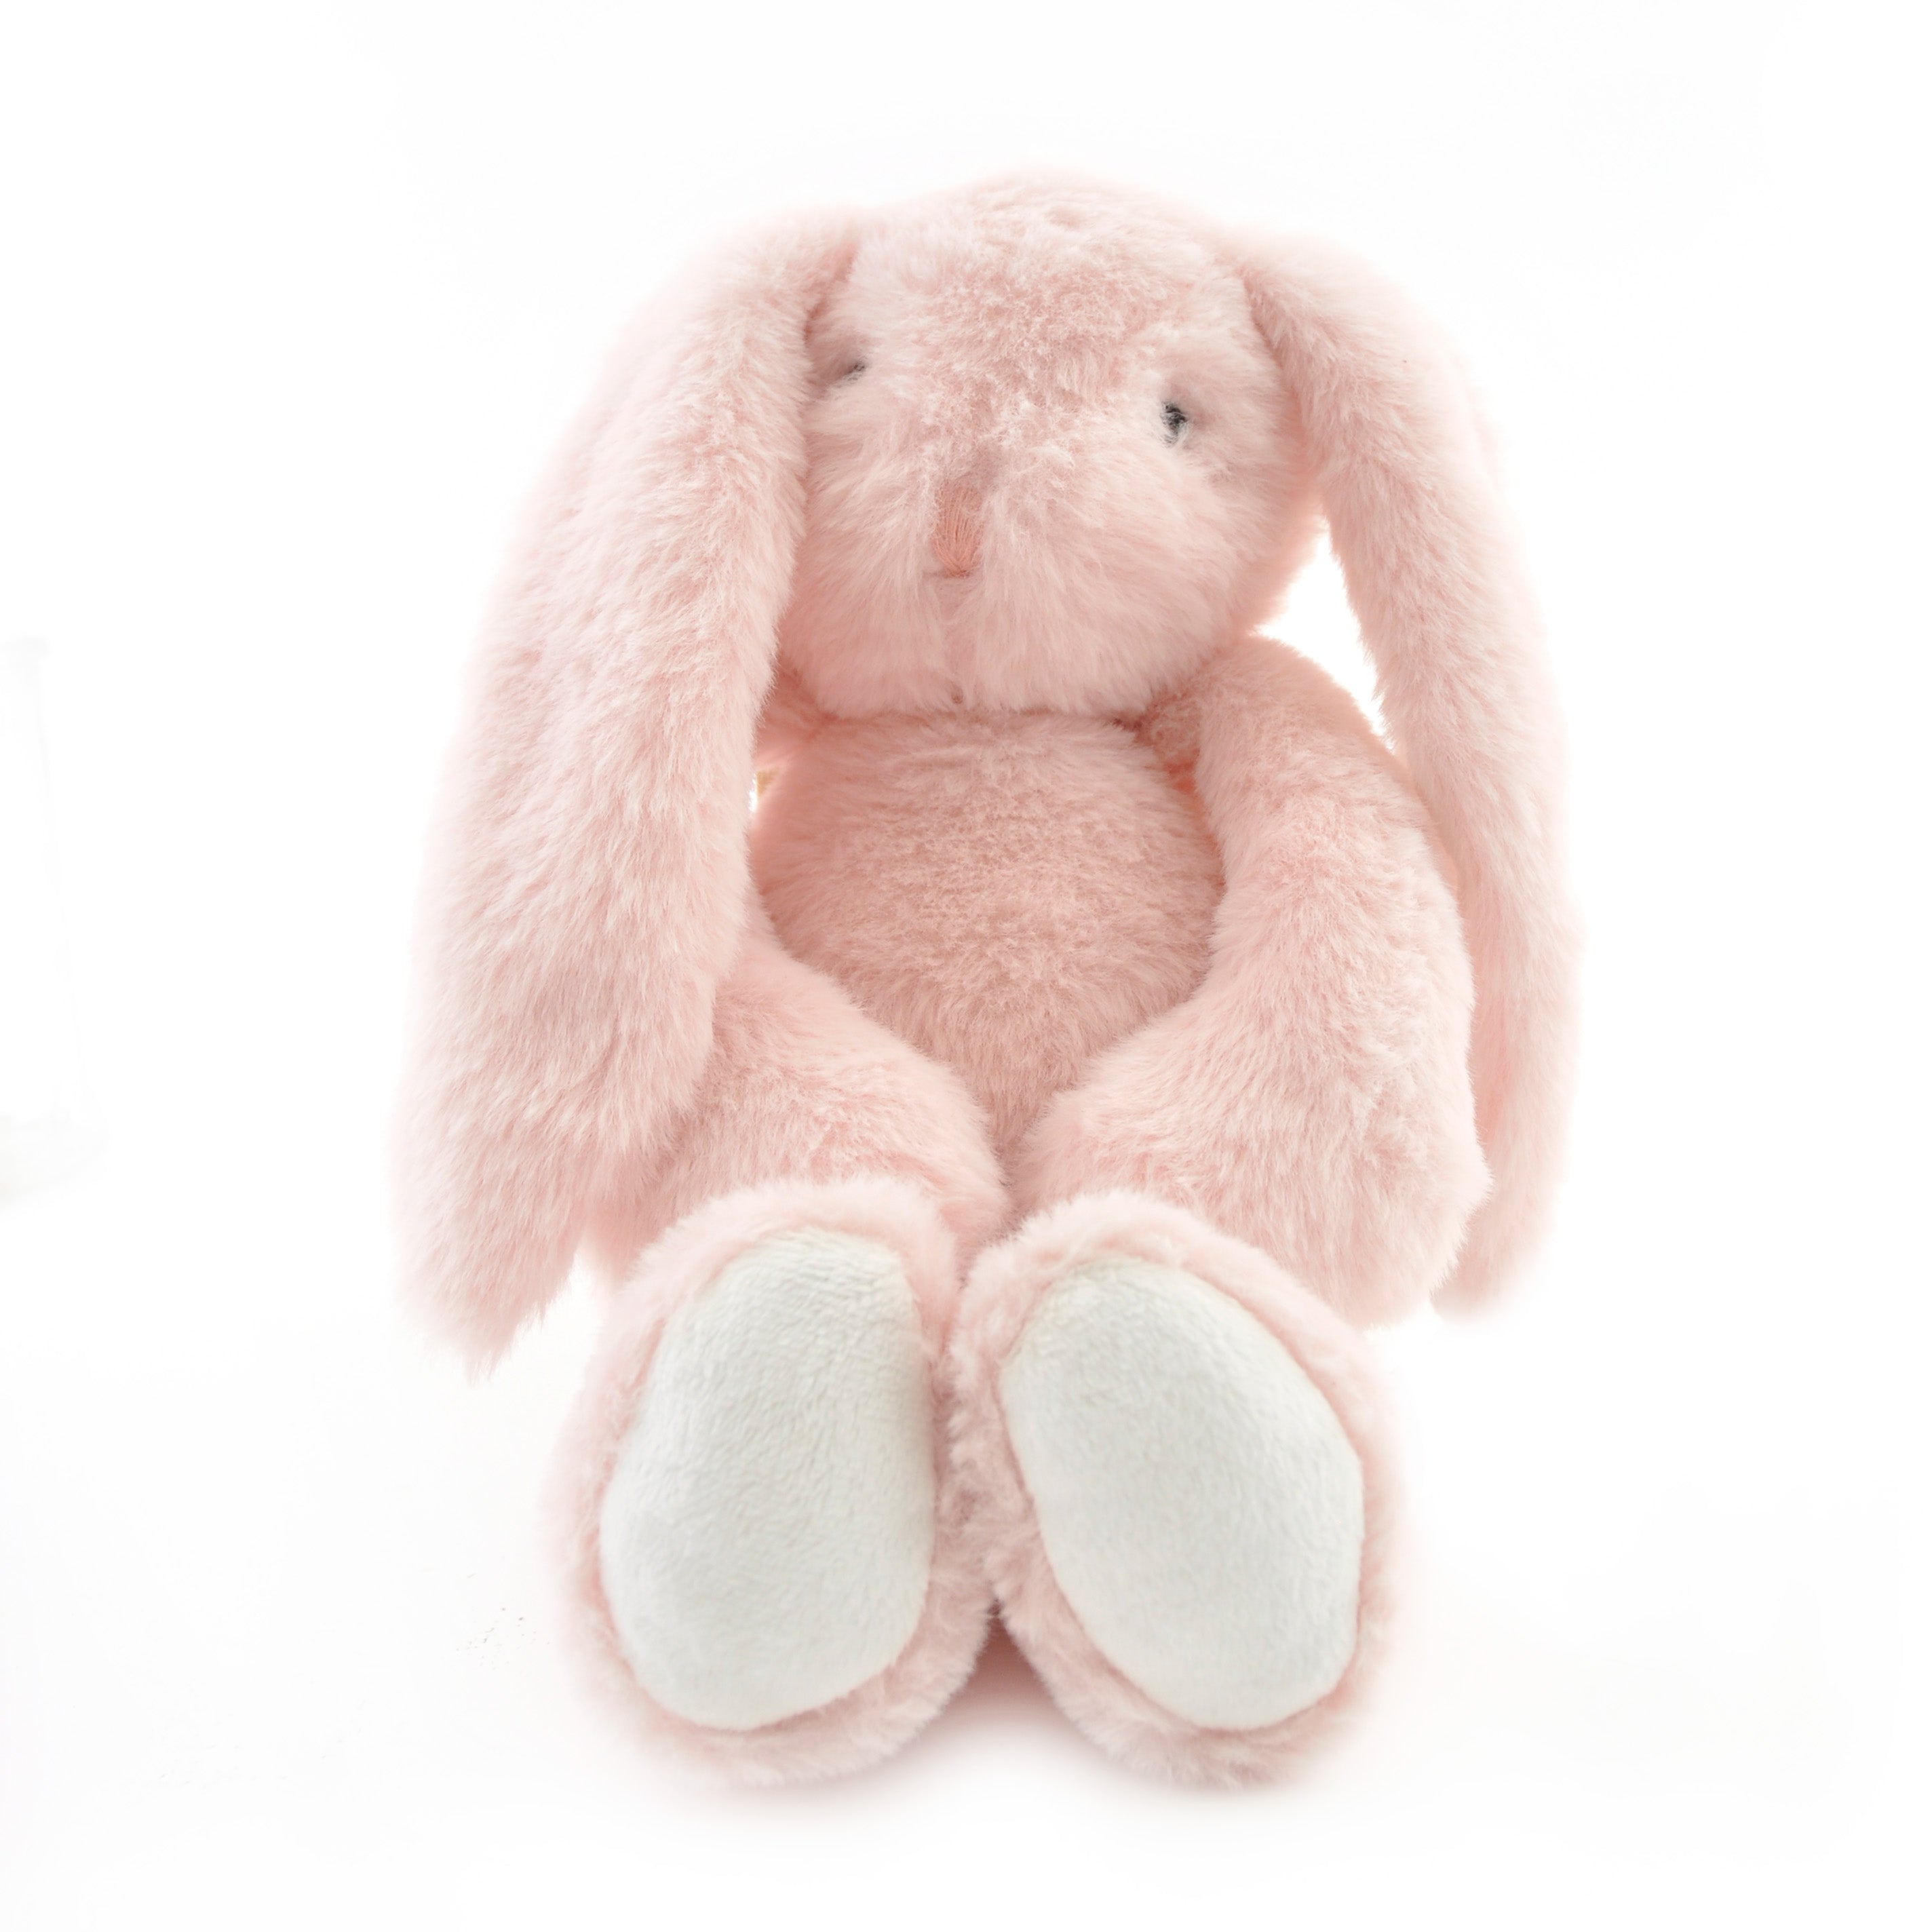 Baby Plush Toy - Bunny Pink